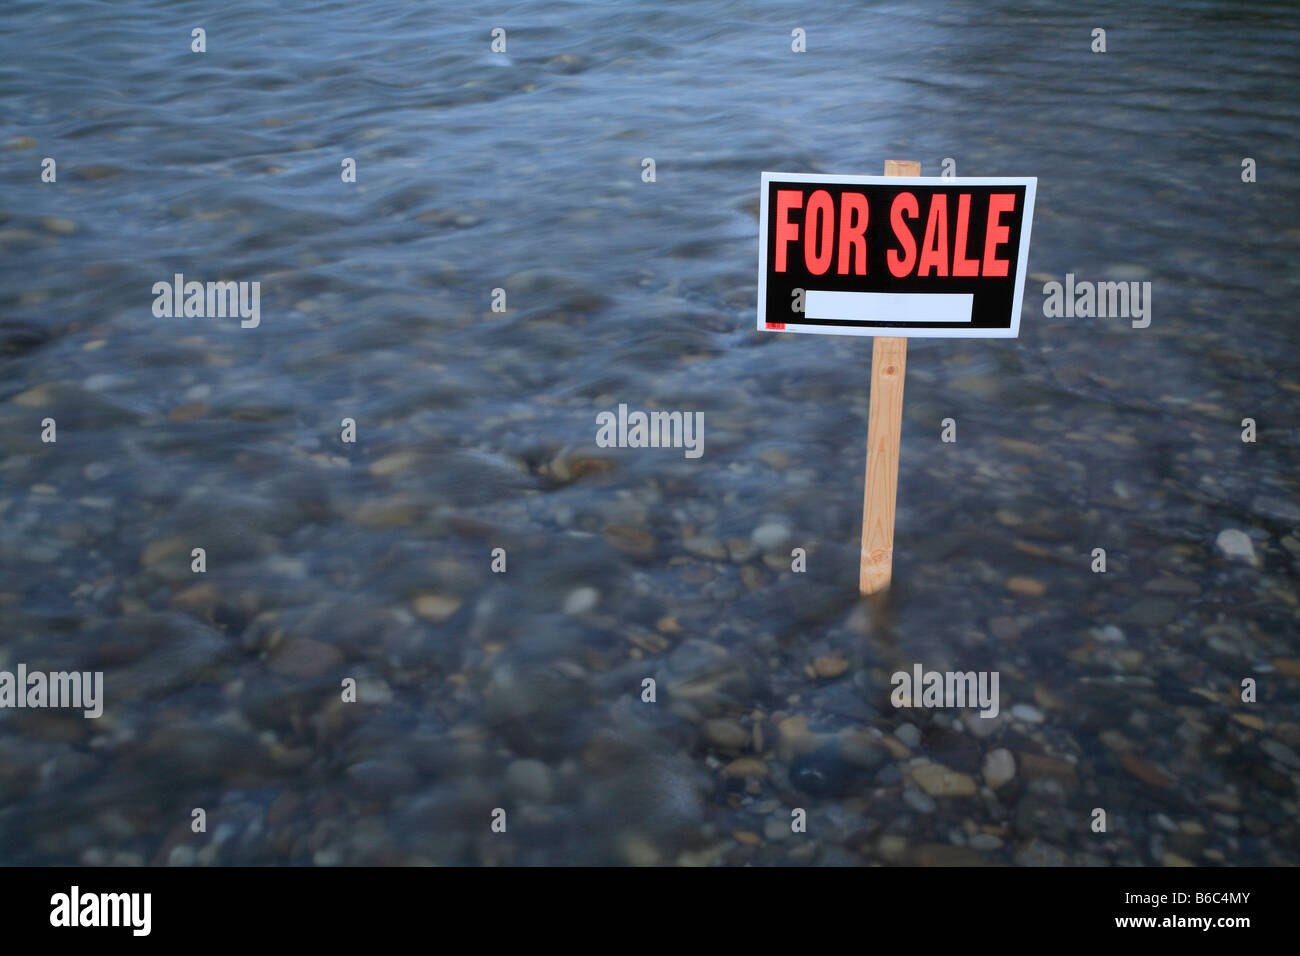 For sale sign in creek Banque D'Images